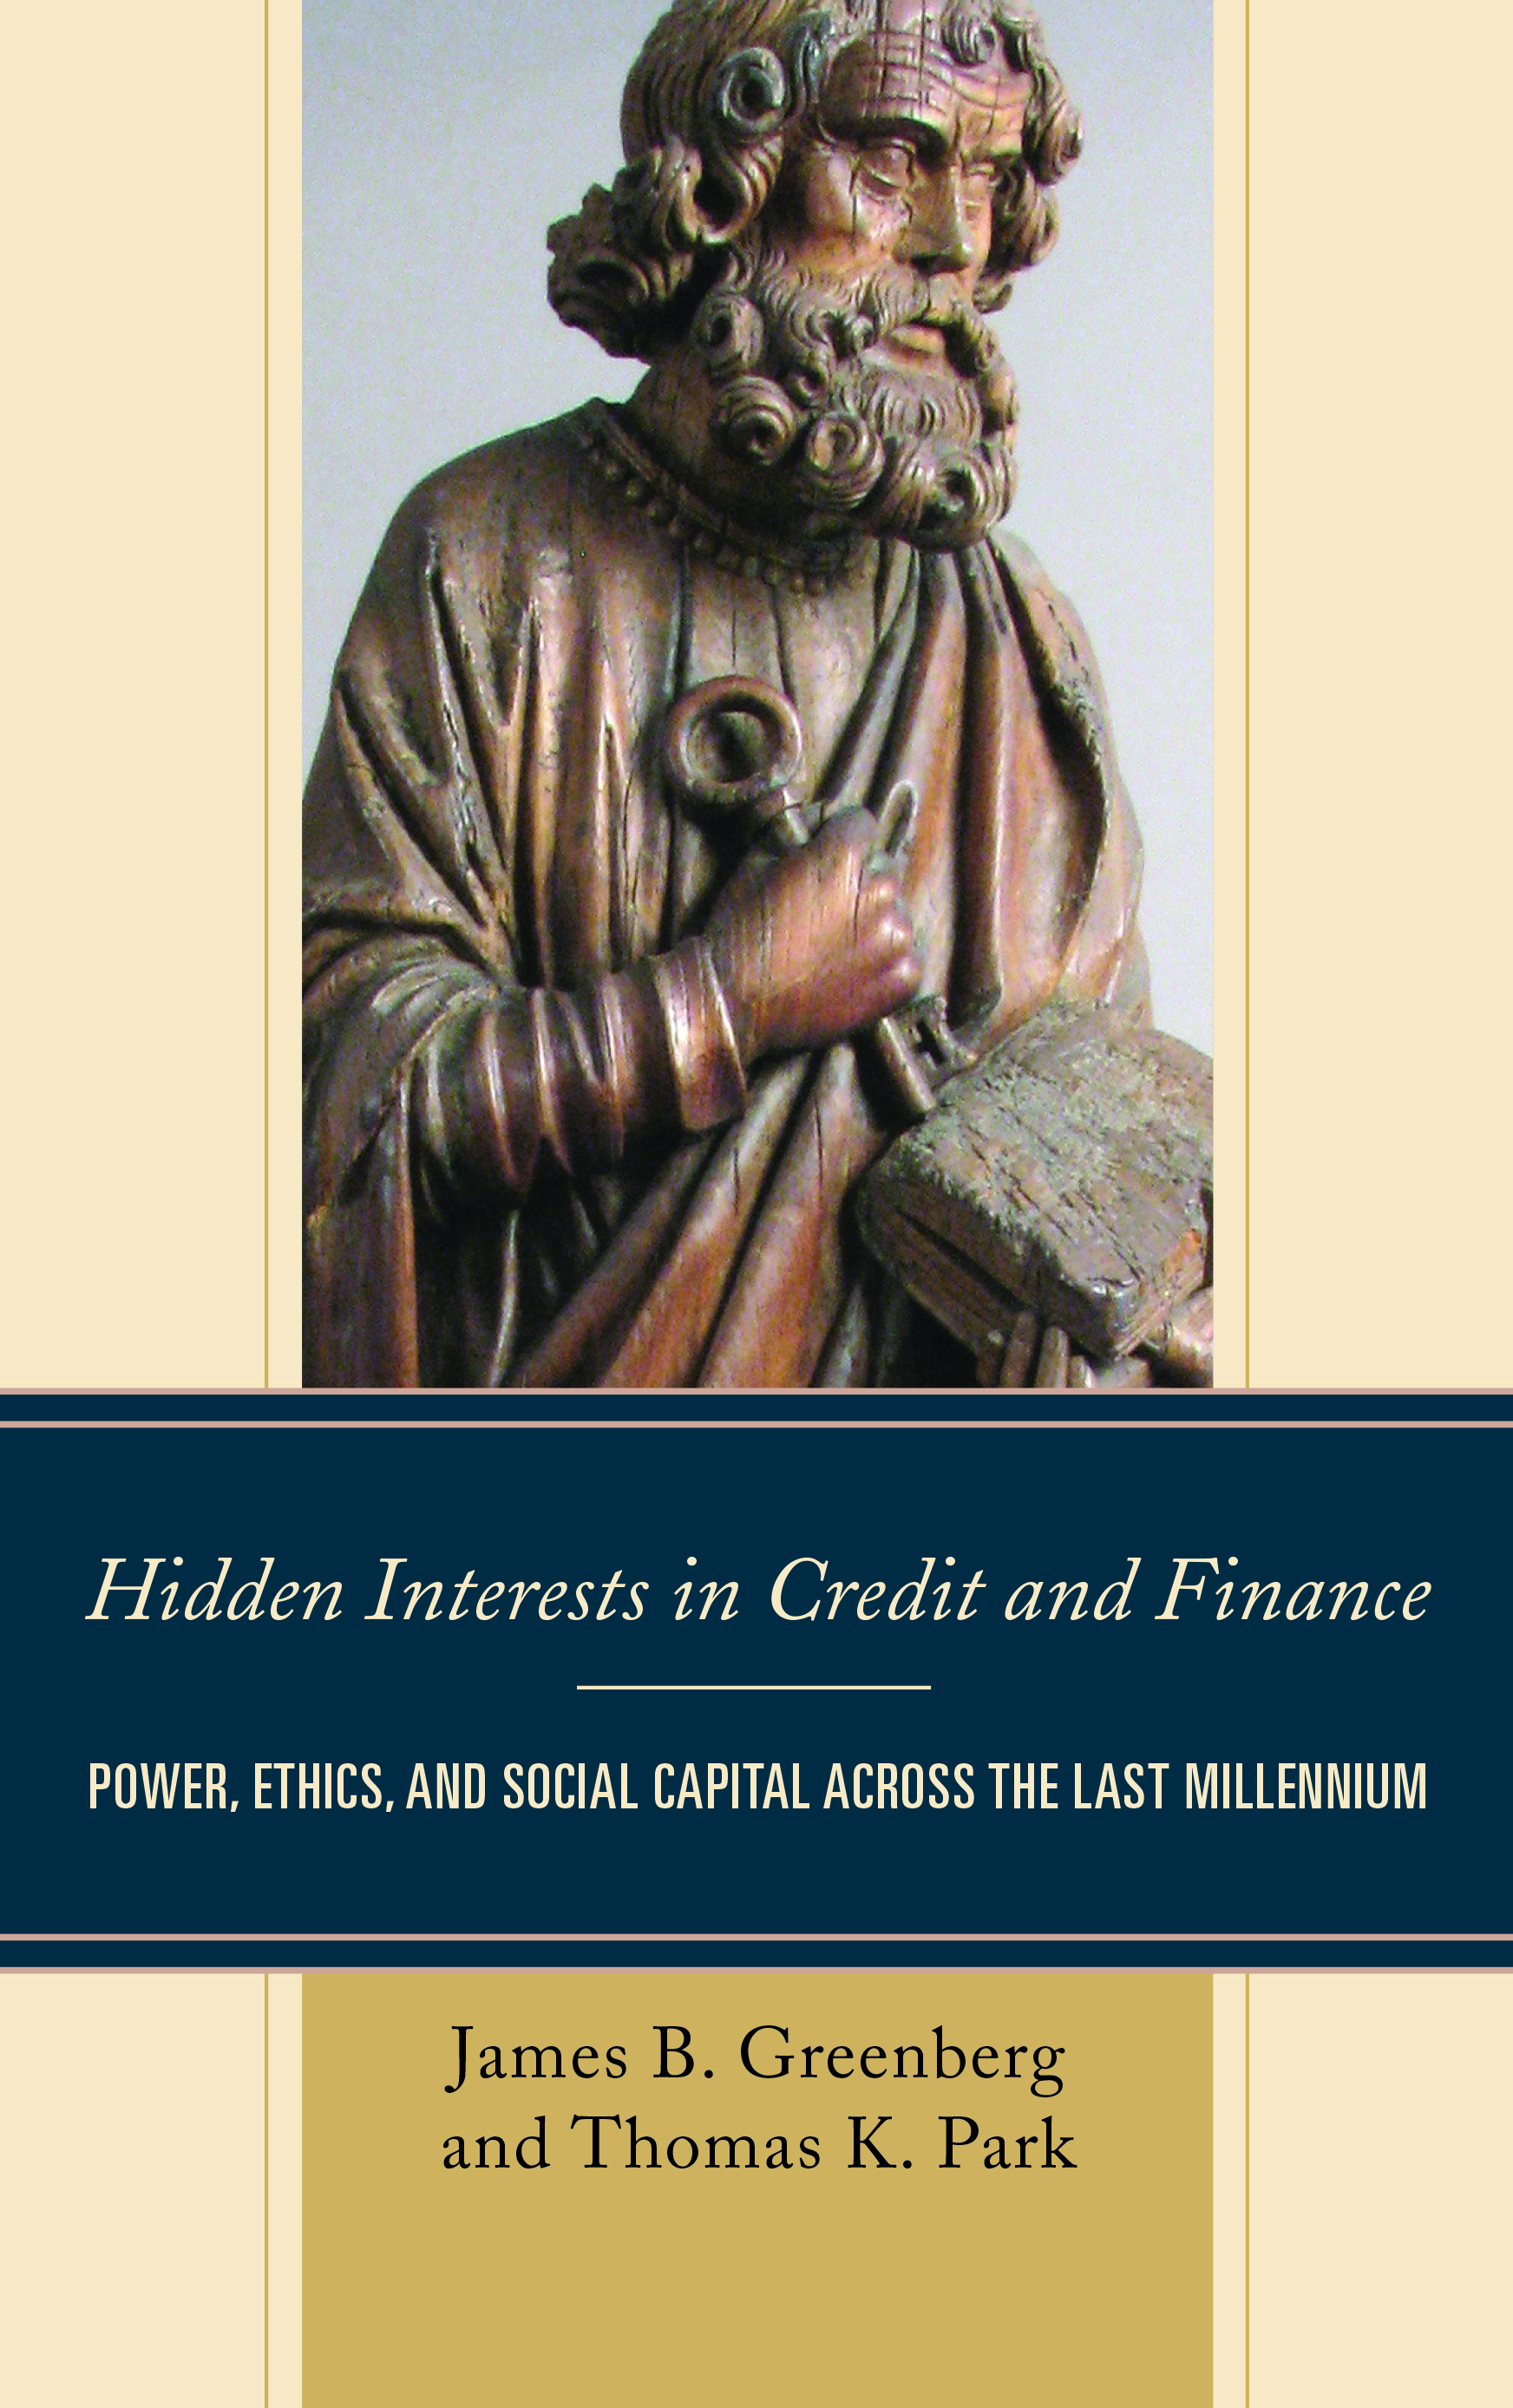 Hidden Interests in Credit and Finance: Power, Ethics, and Social Capital across the Last Millennium